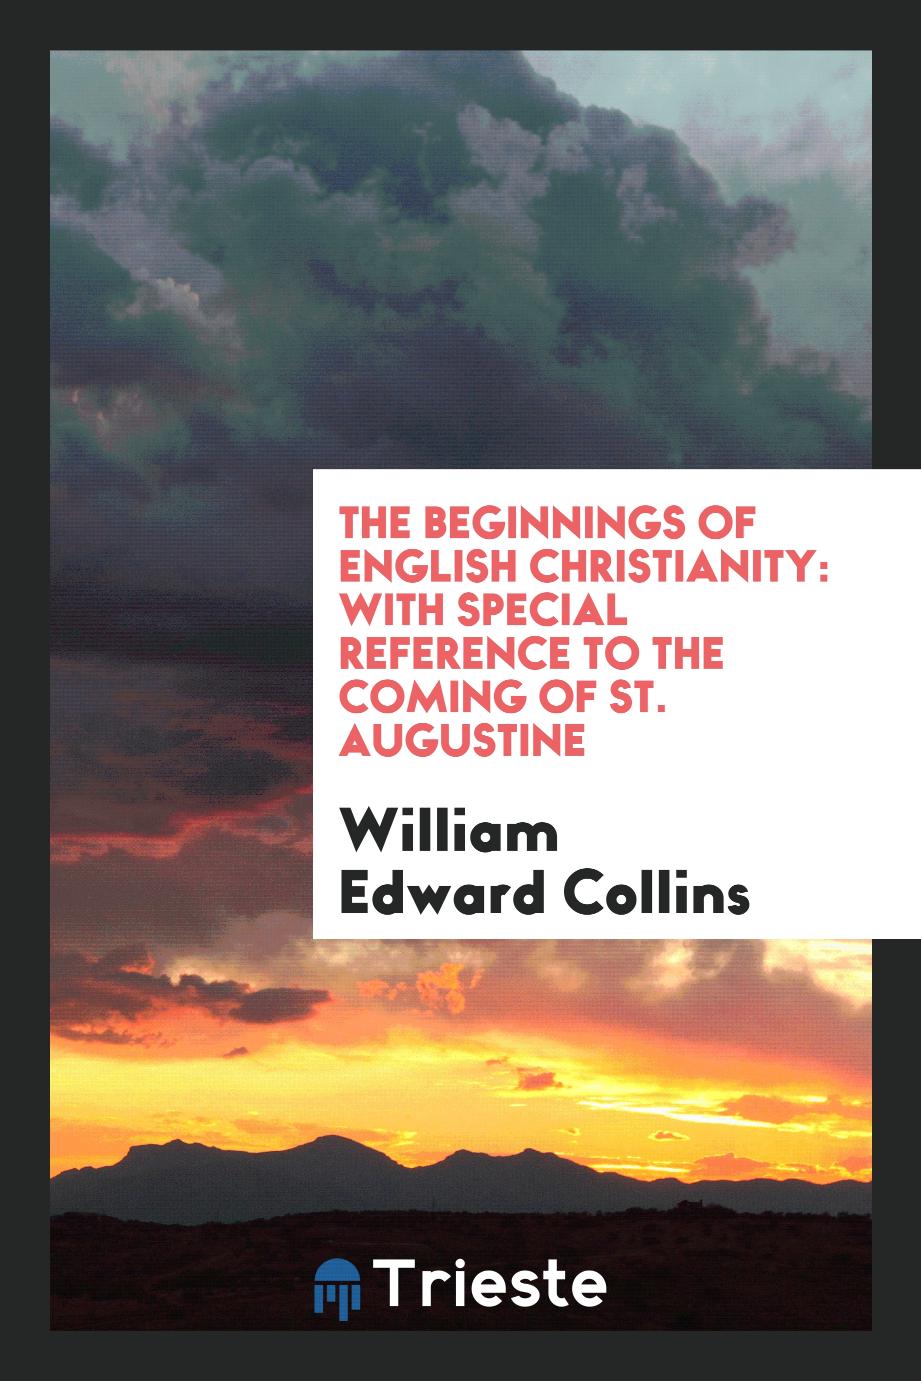 The beginnings of English Christianity: with special reference to the coming of St. Augustine